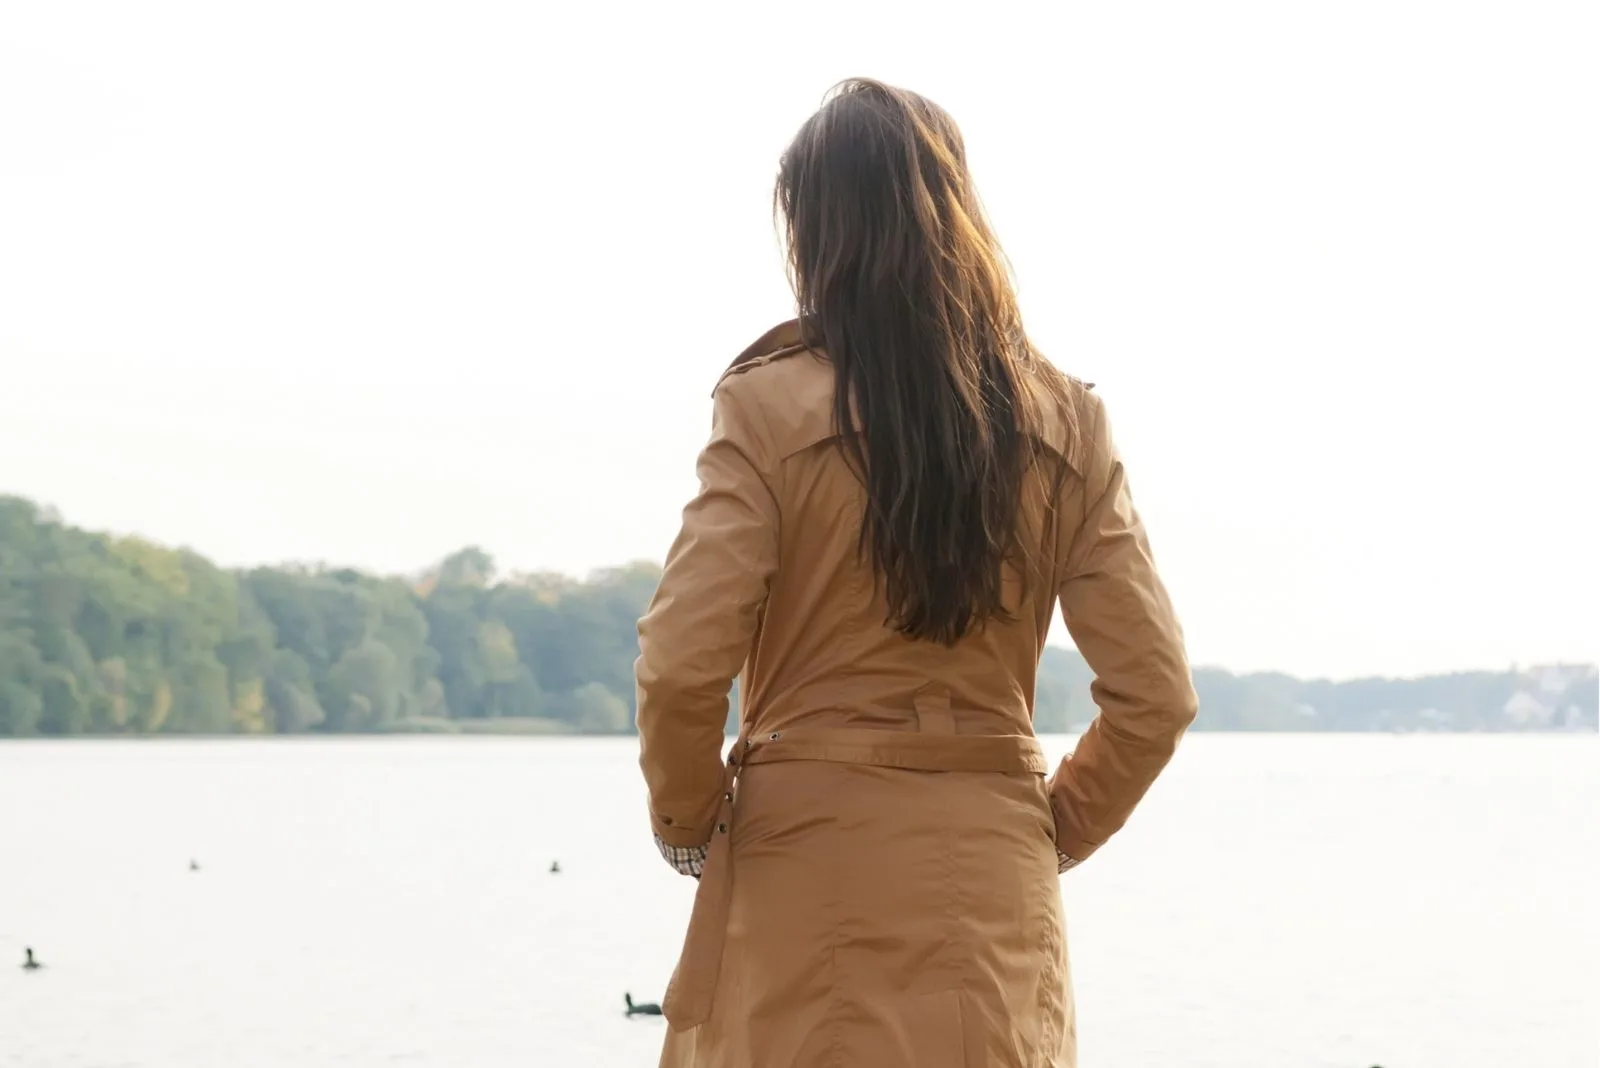 rear view of a woman facing the lake or body of water